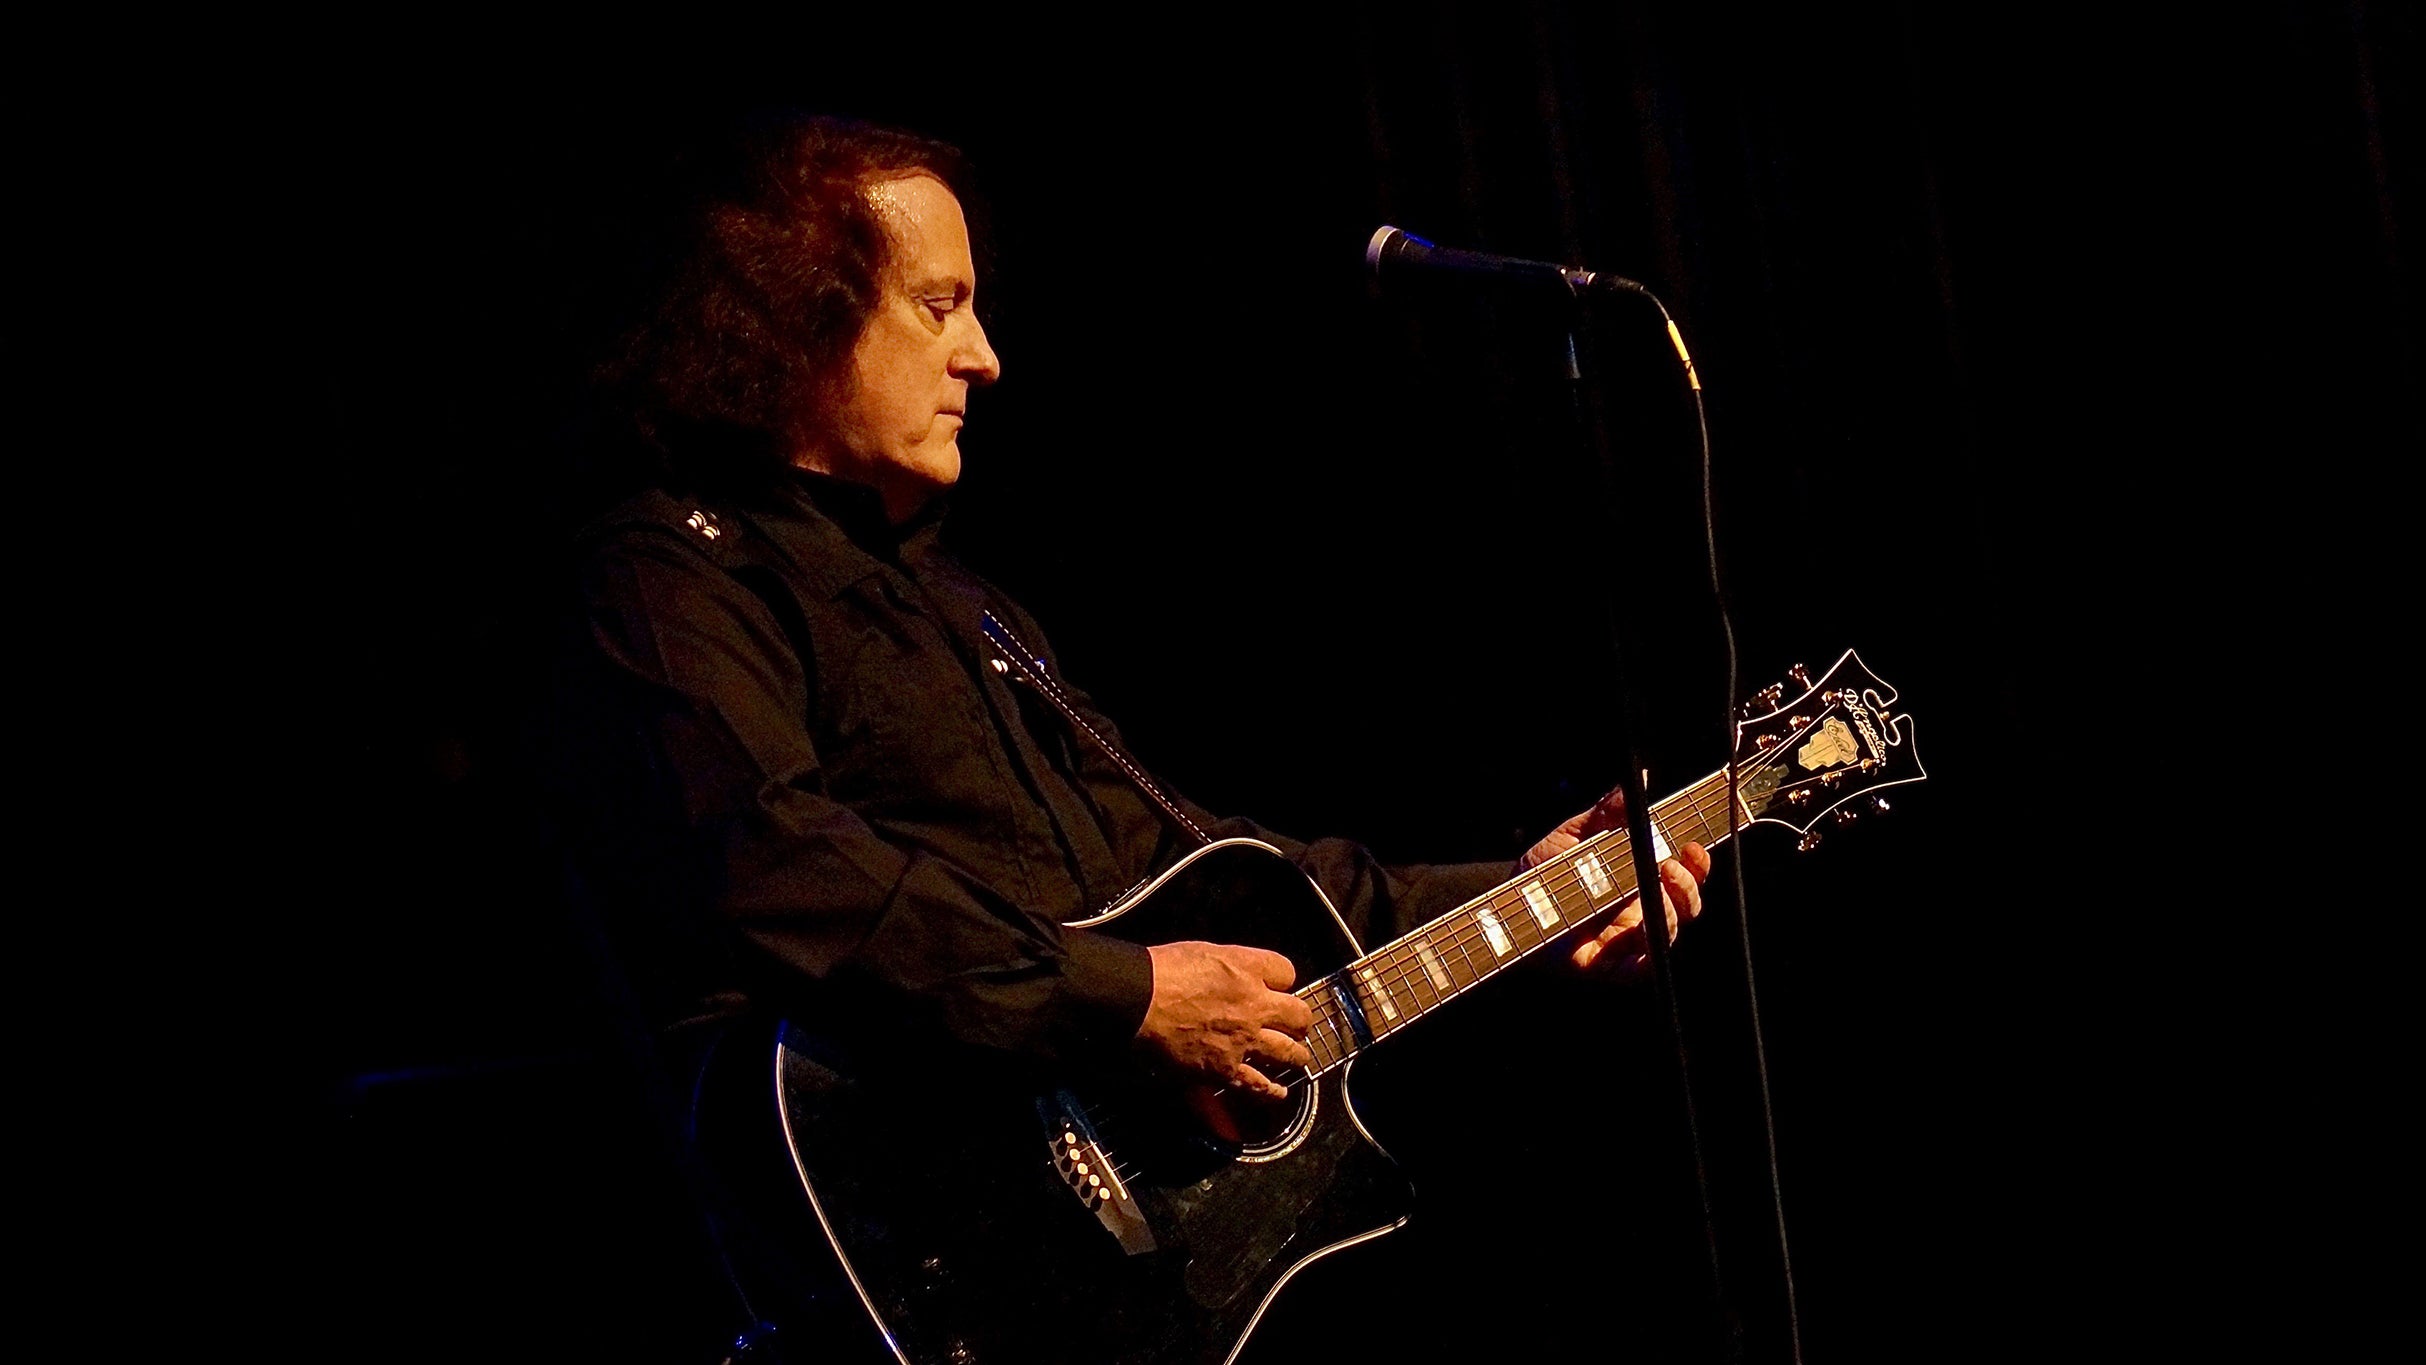 Tommy James at Blue Gate Performing Arts Center